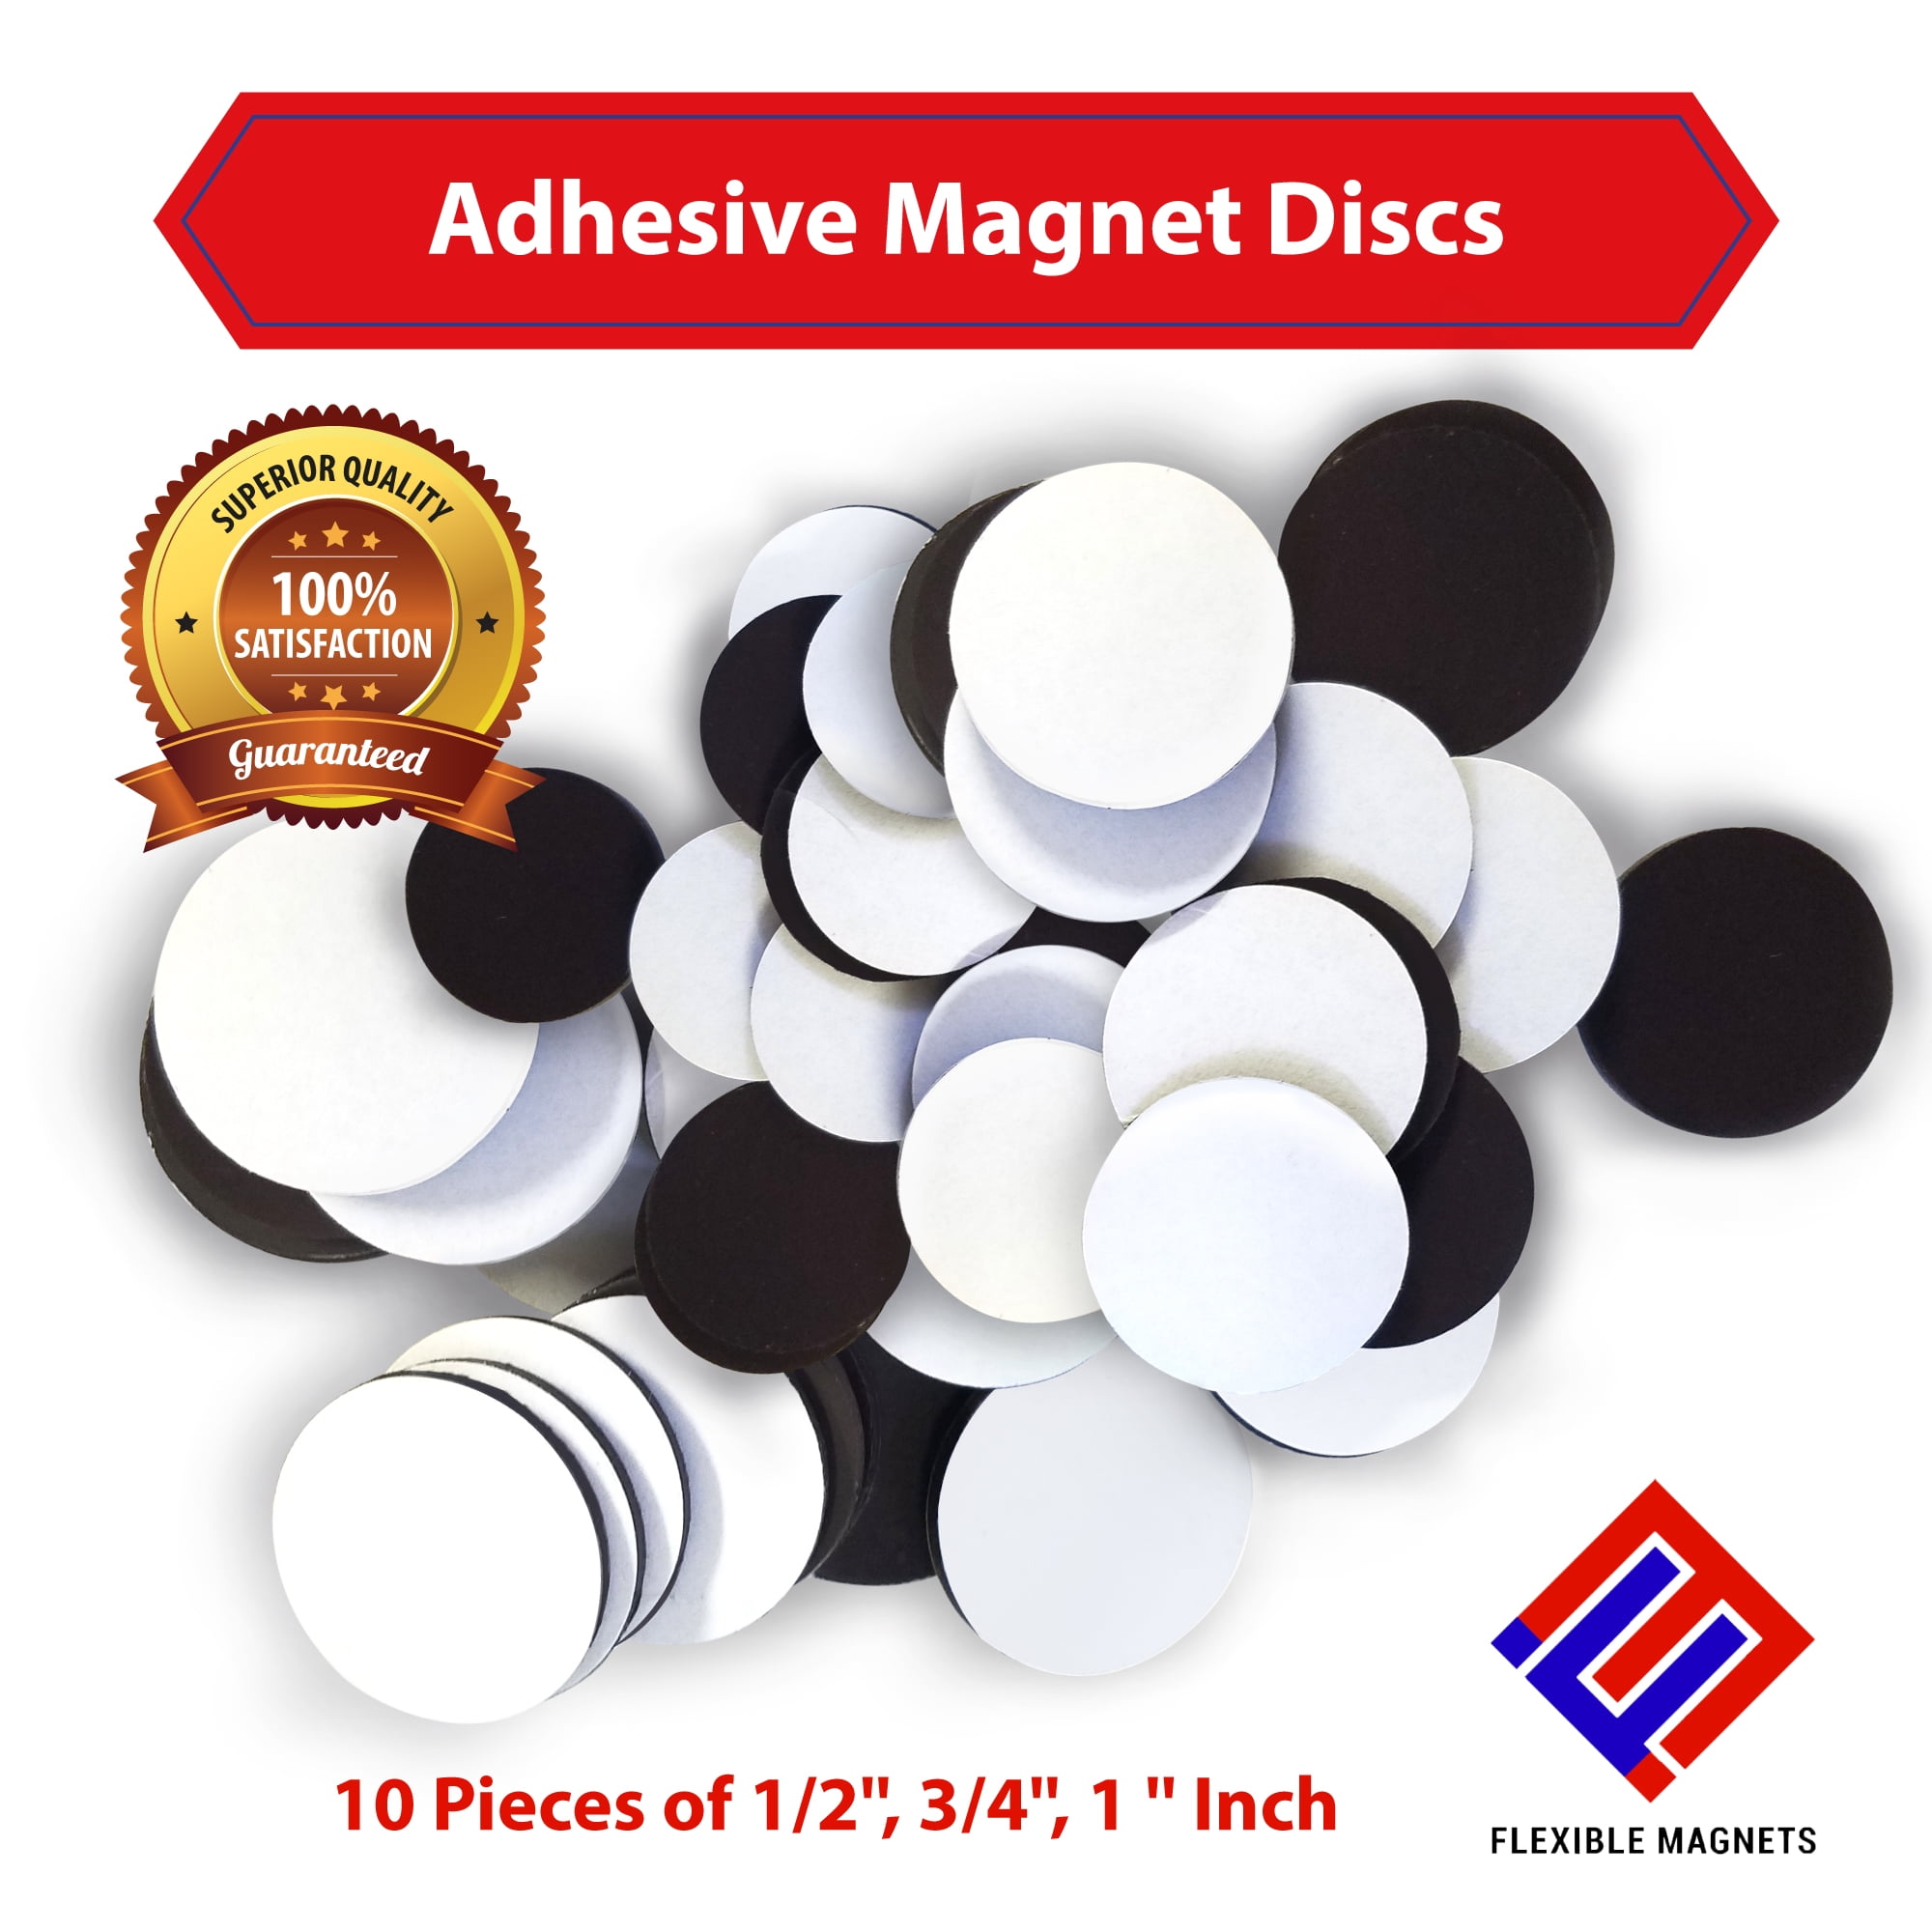 Wholesale LOT 750 ROUND 1/2" Dot MAGNETS w/Self ADHESIVE backing-Light weight FS 